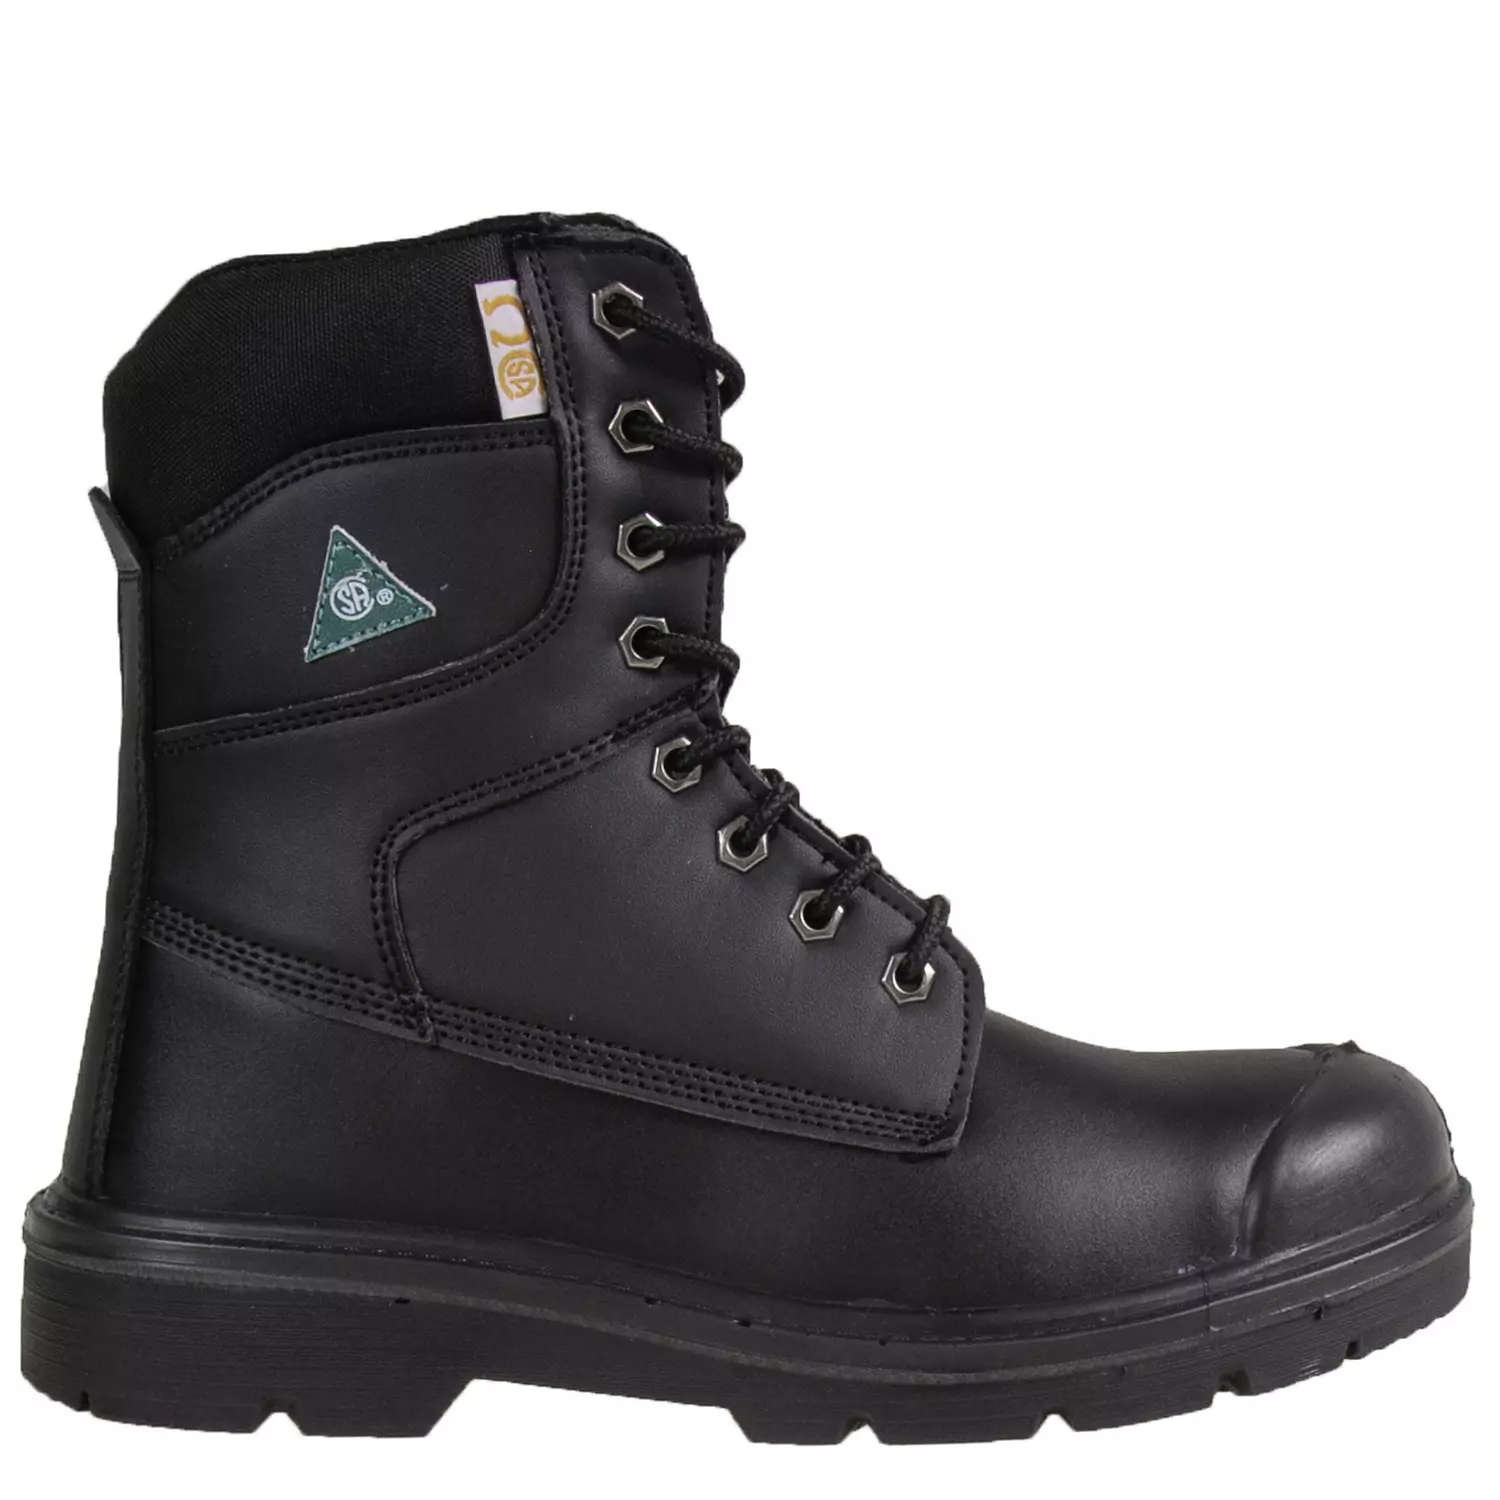 C.S.A. Approved - Work boots, size 8